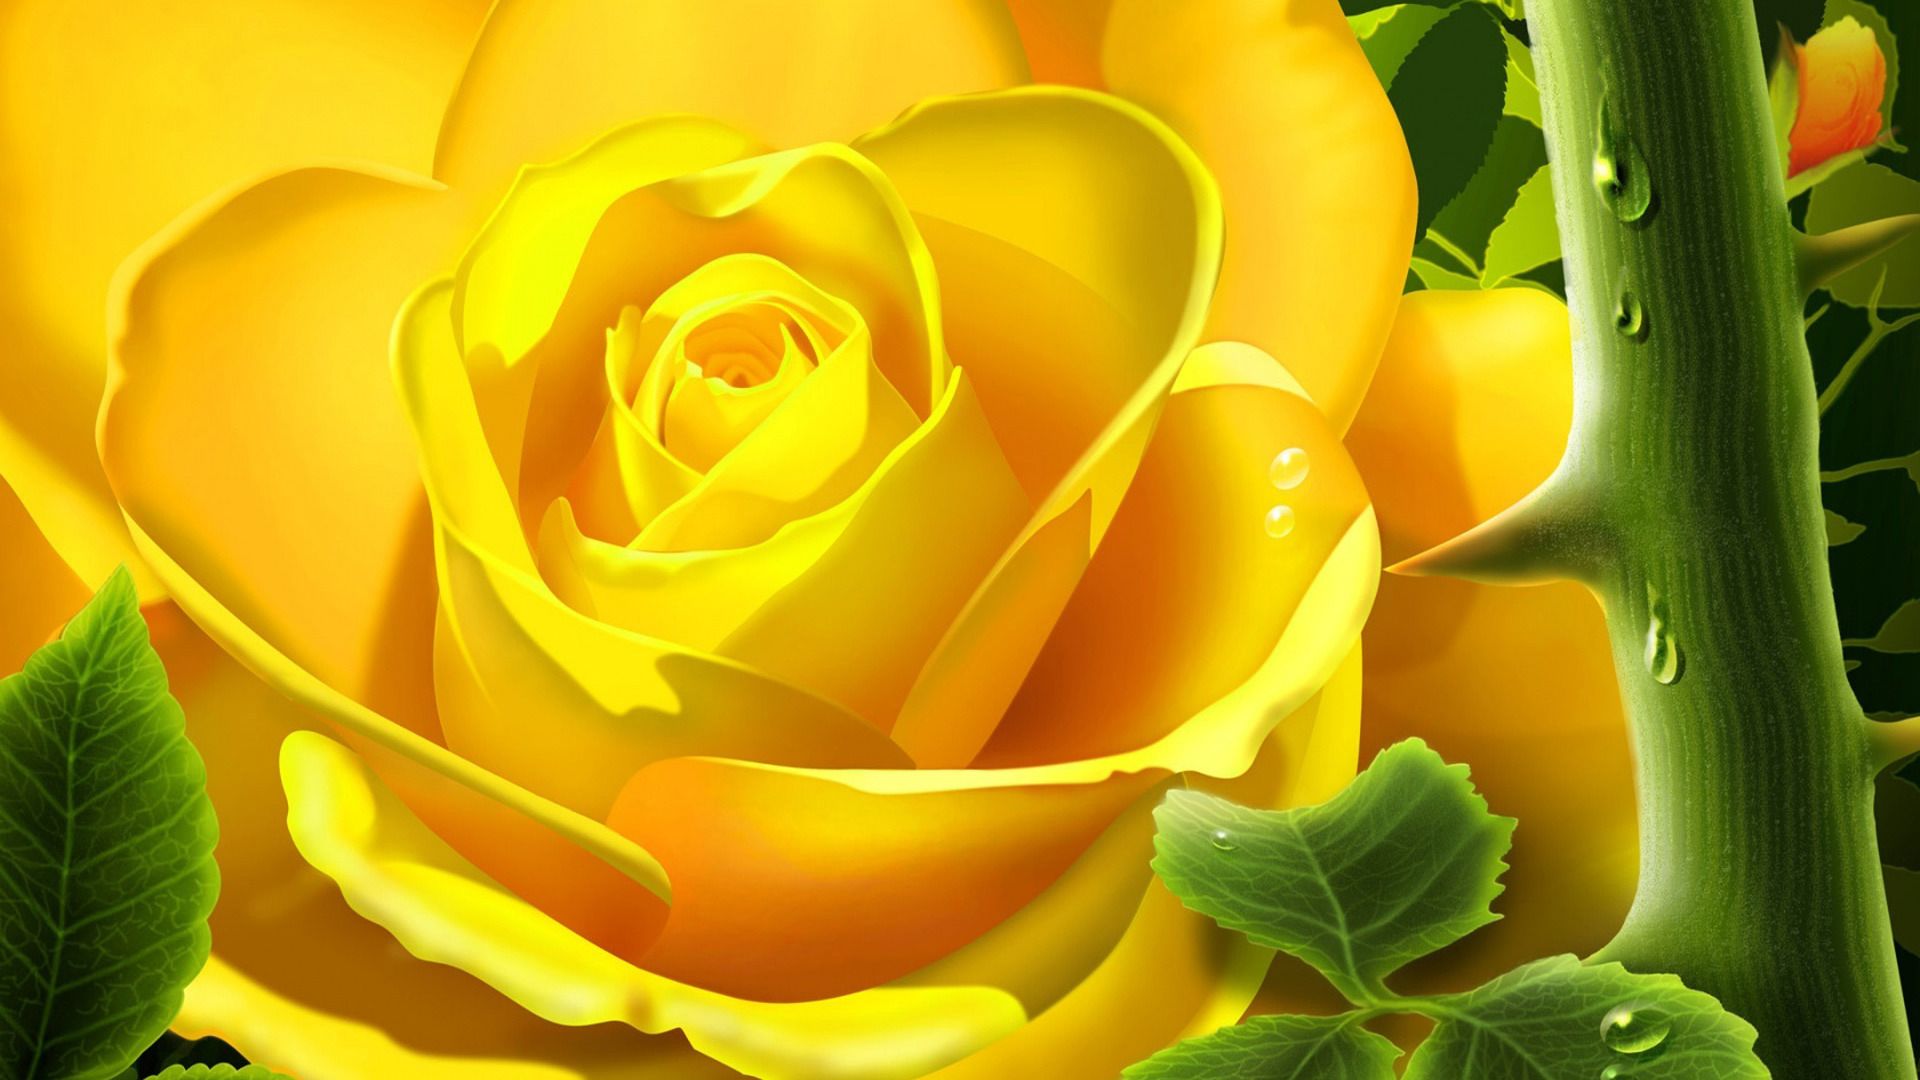 Yellow Rose HD Wallpaper Yellow Rose Photos Cool Backgrounds